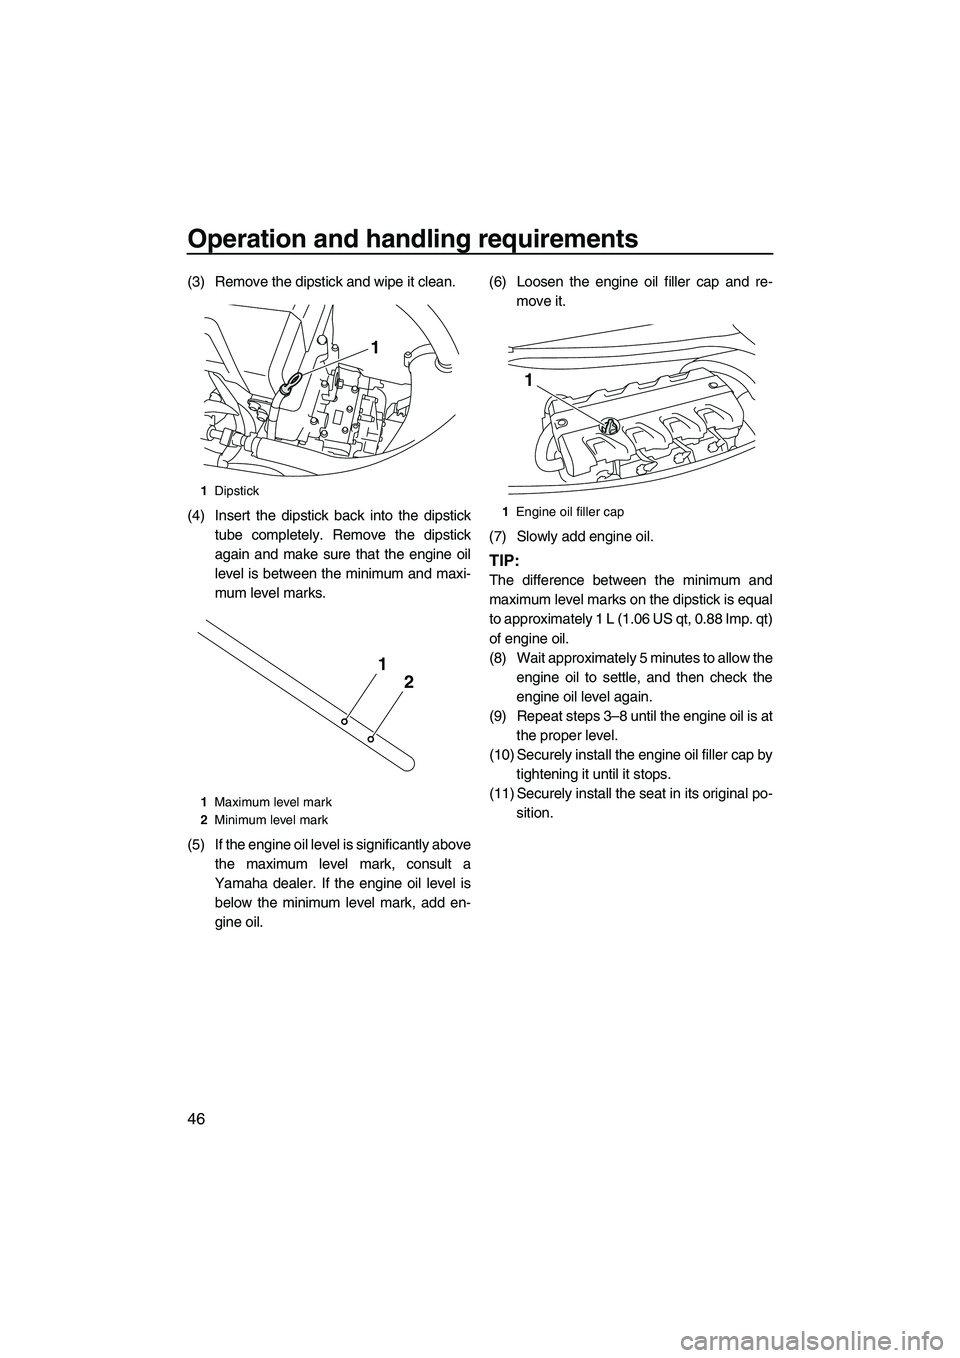 YAMAHA VXS 2013  Owners Manual Operation and handling requirements
46
(3) Remove the dipstick and wipe it clean.
(4) Insert the dipstick back into the dipsticktube completely. Remove the dipstick
again and make sure that the engine